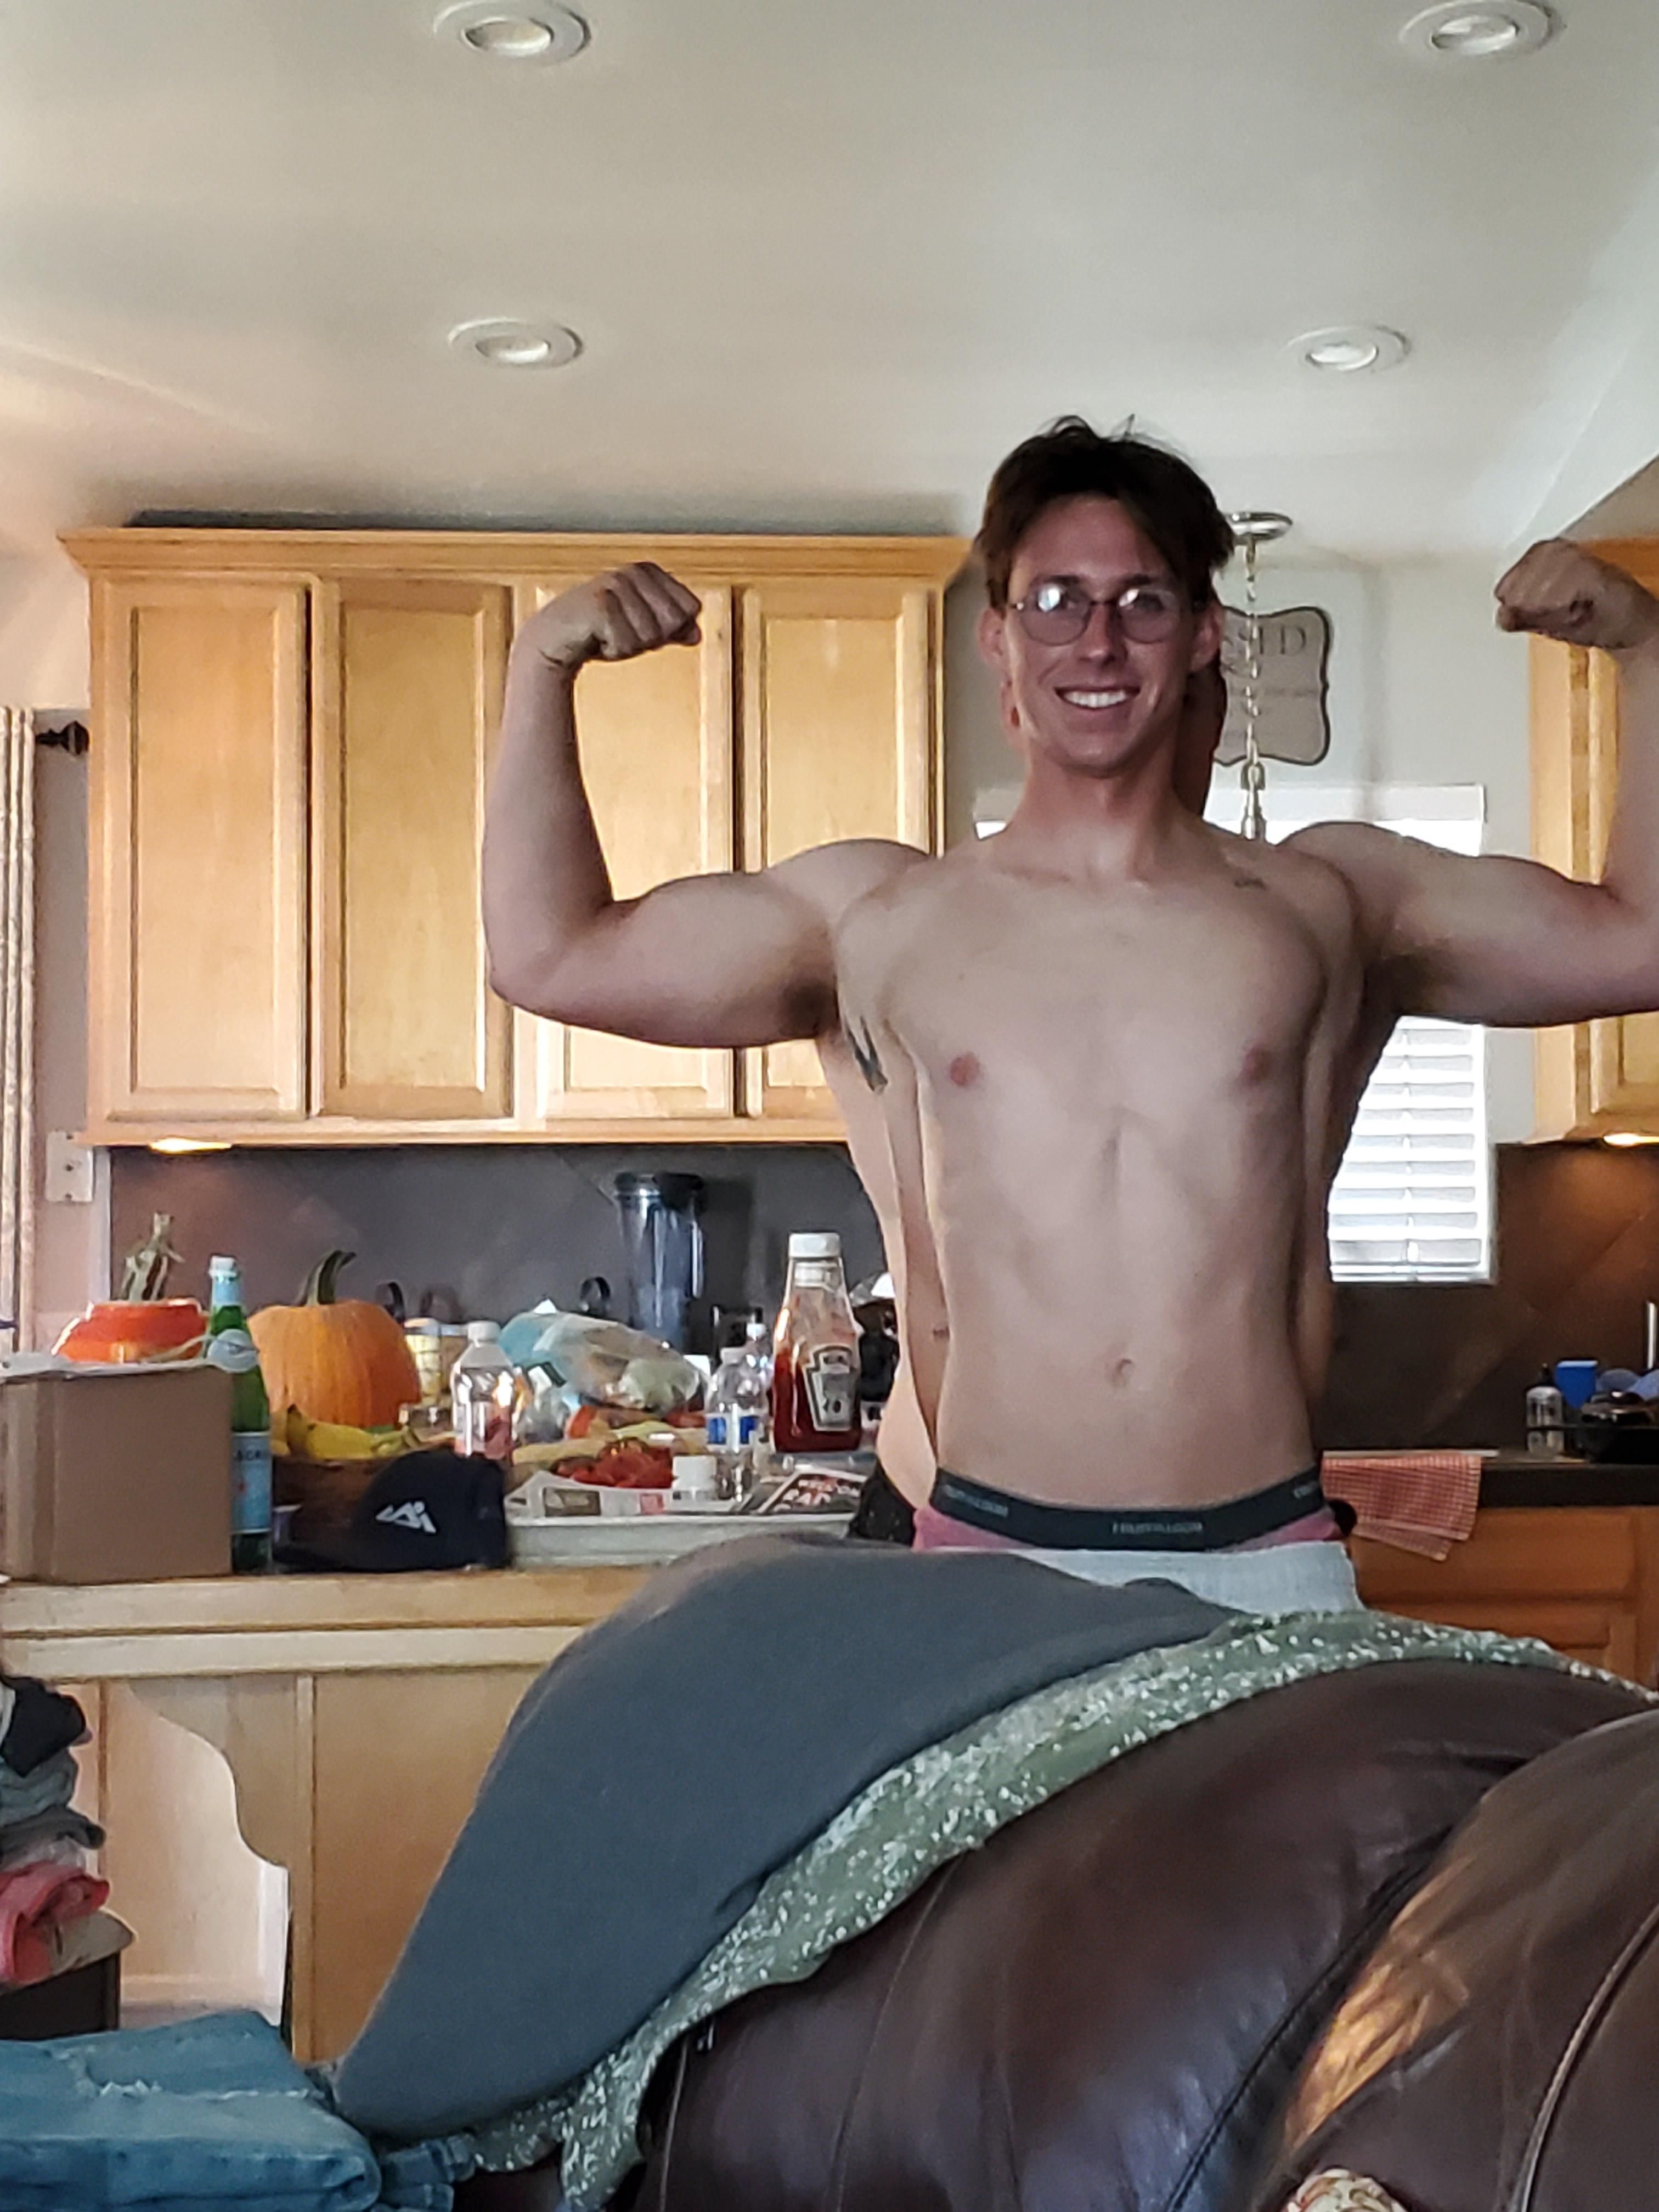 How my little brother put on 50 lbs of muscle in minutes!